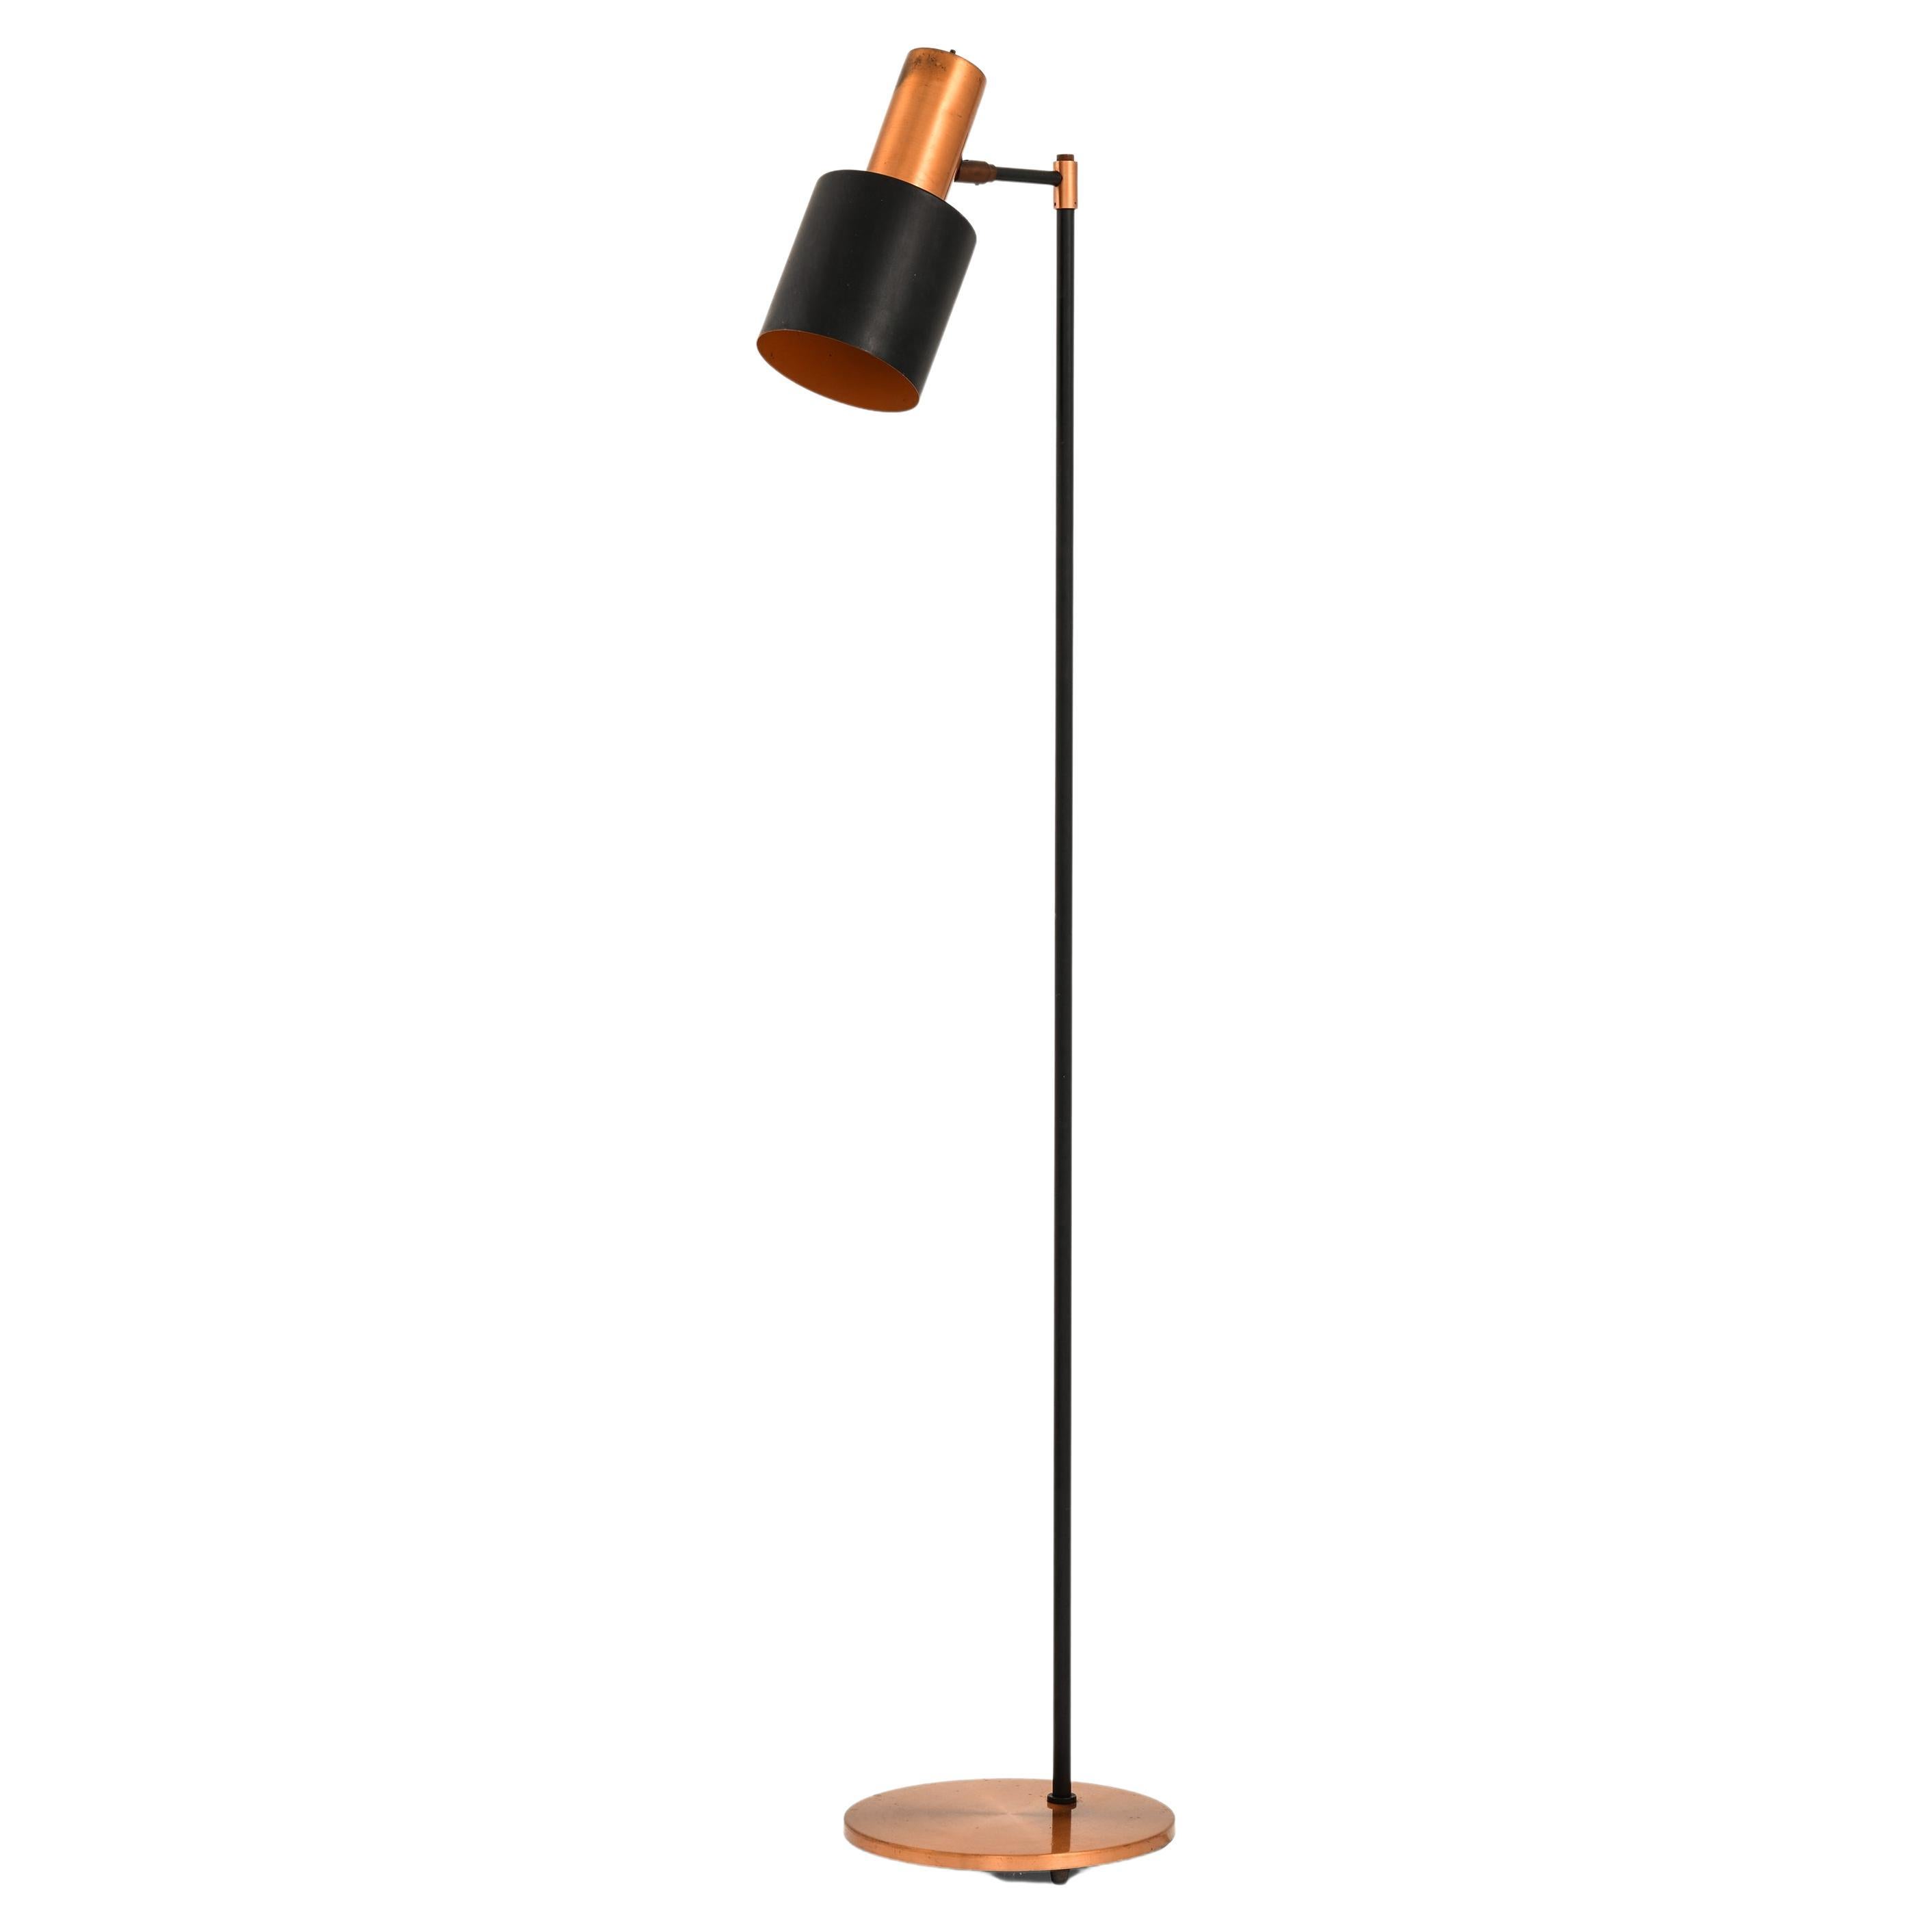 Floor Lamp in Black Lacquered Metal, Copper and Teak by Jo Hammerborg, 1950's For Sale